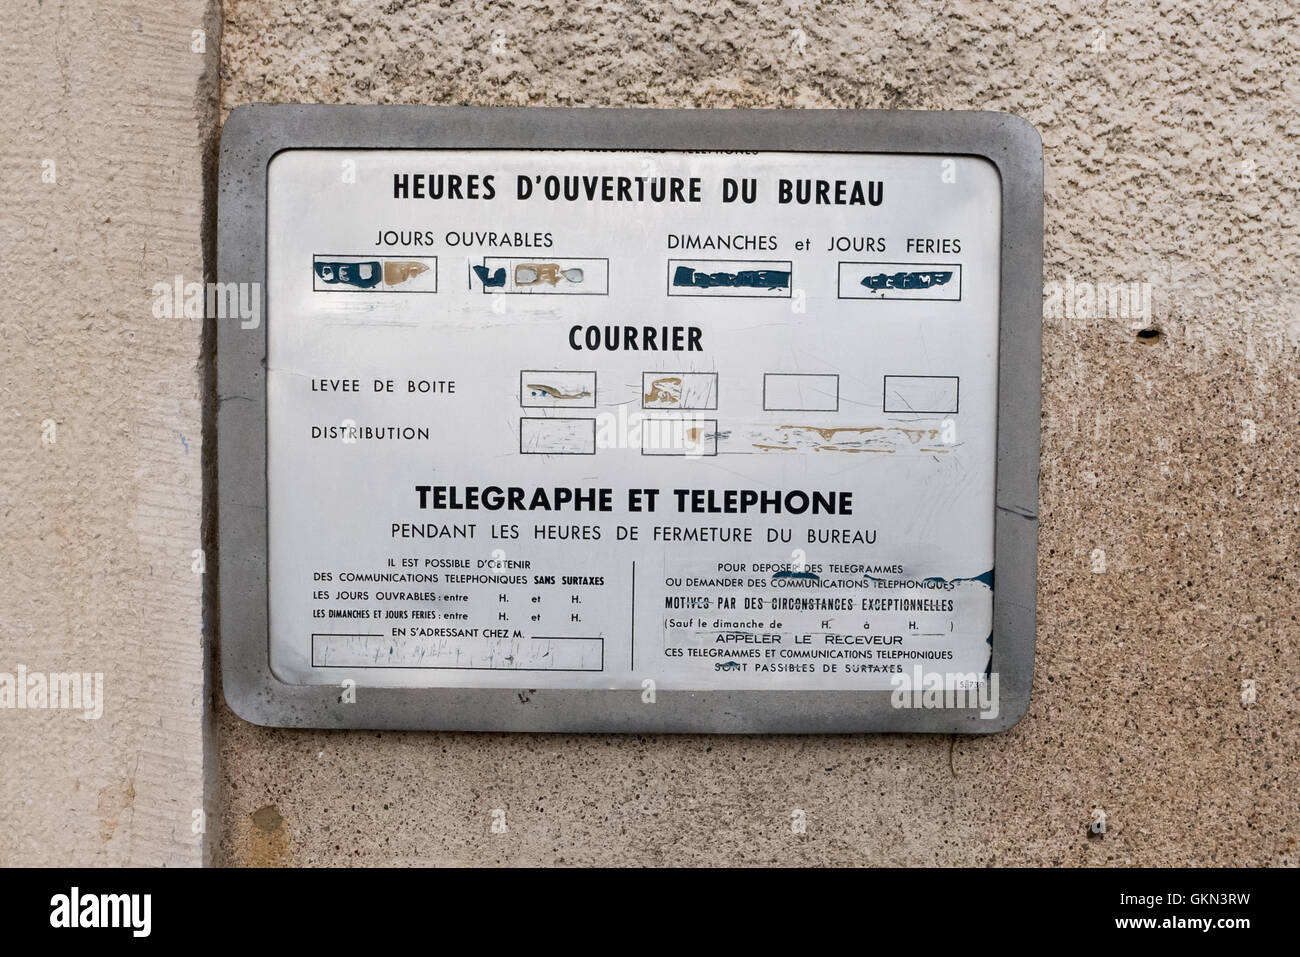 Standard opening hours sign outside a French Post Office Stock Photo - Alamy